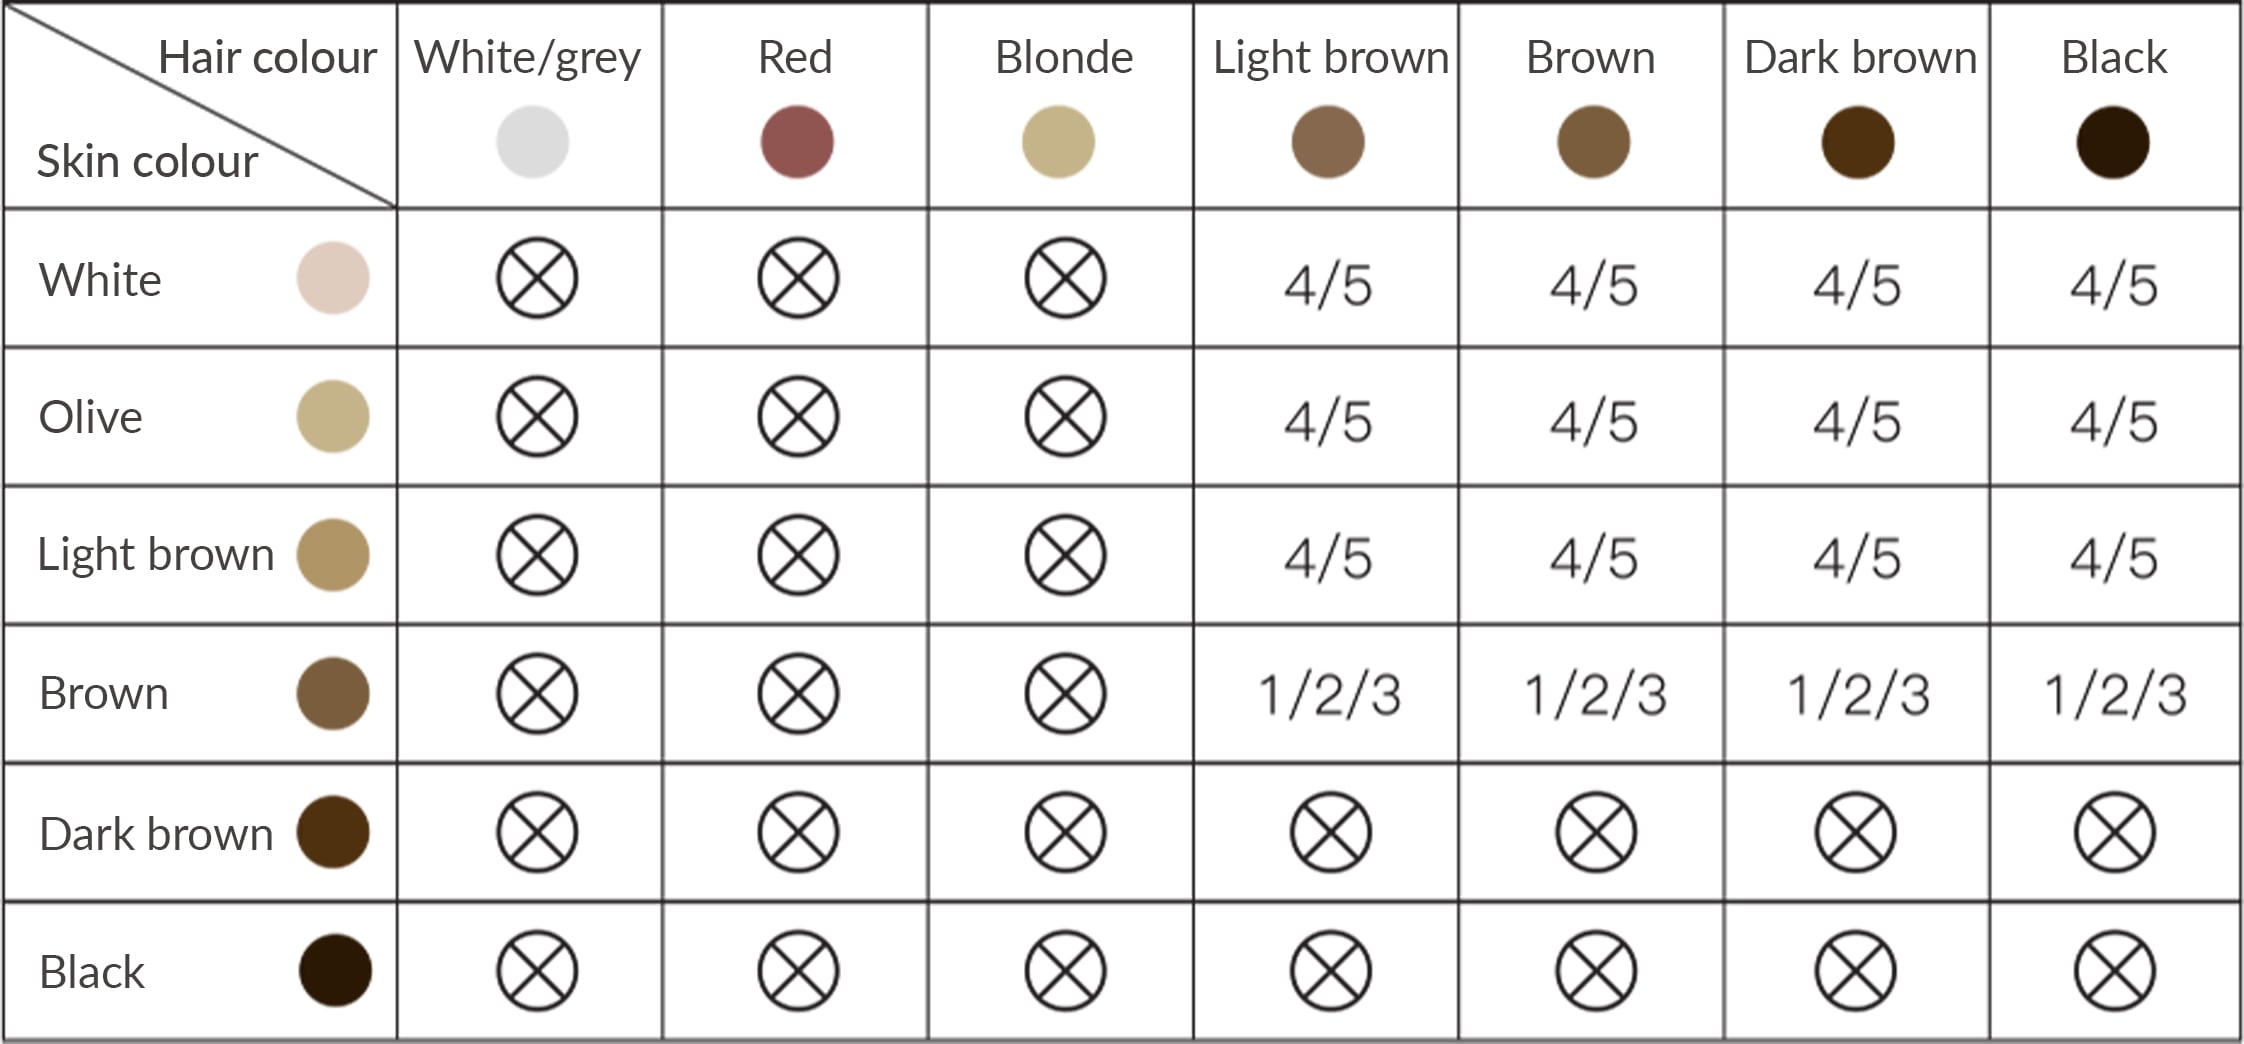 IPL hair and skin color guide colour guide